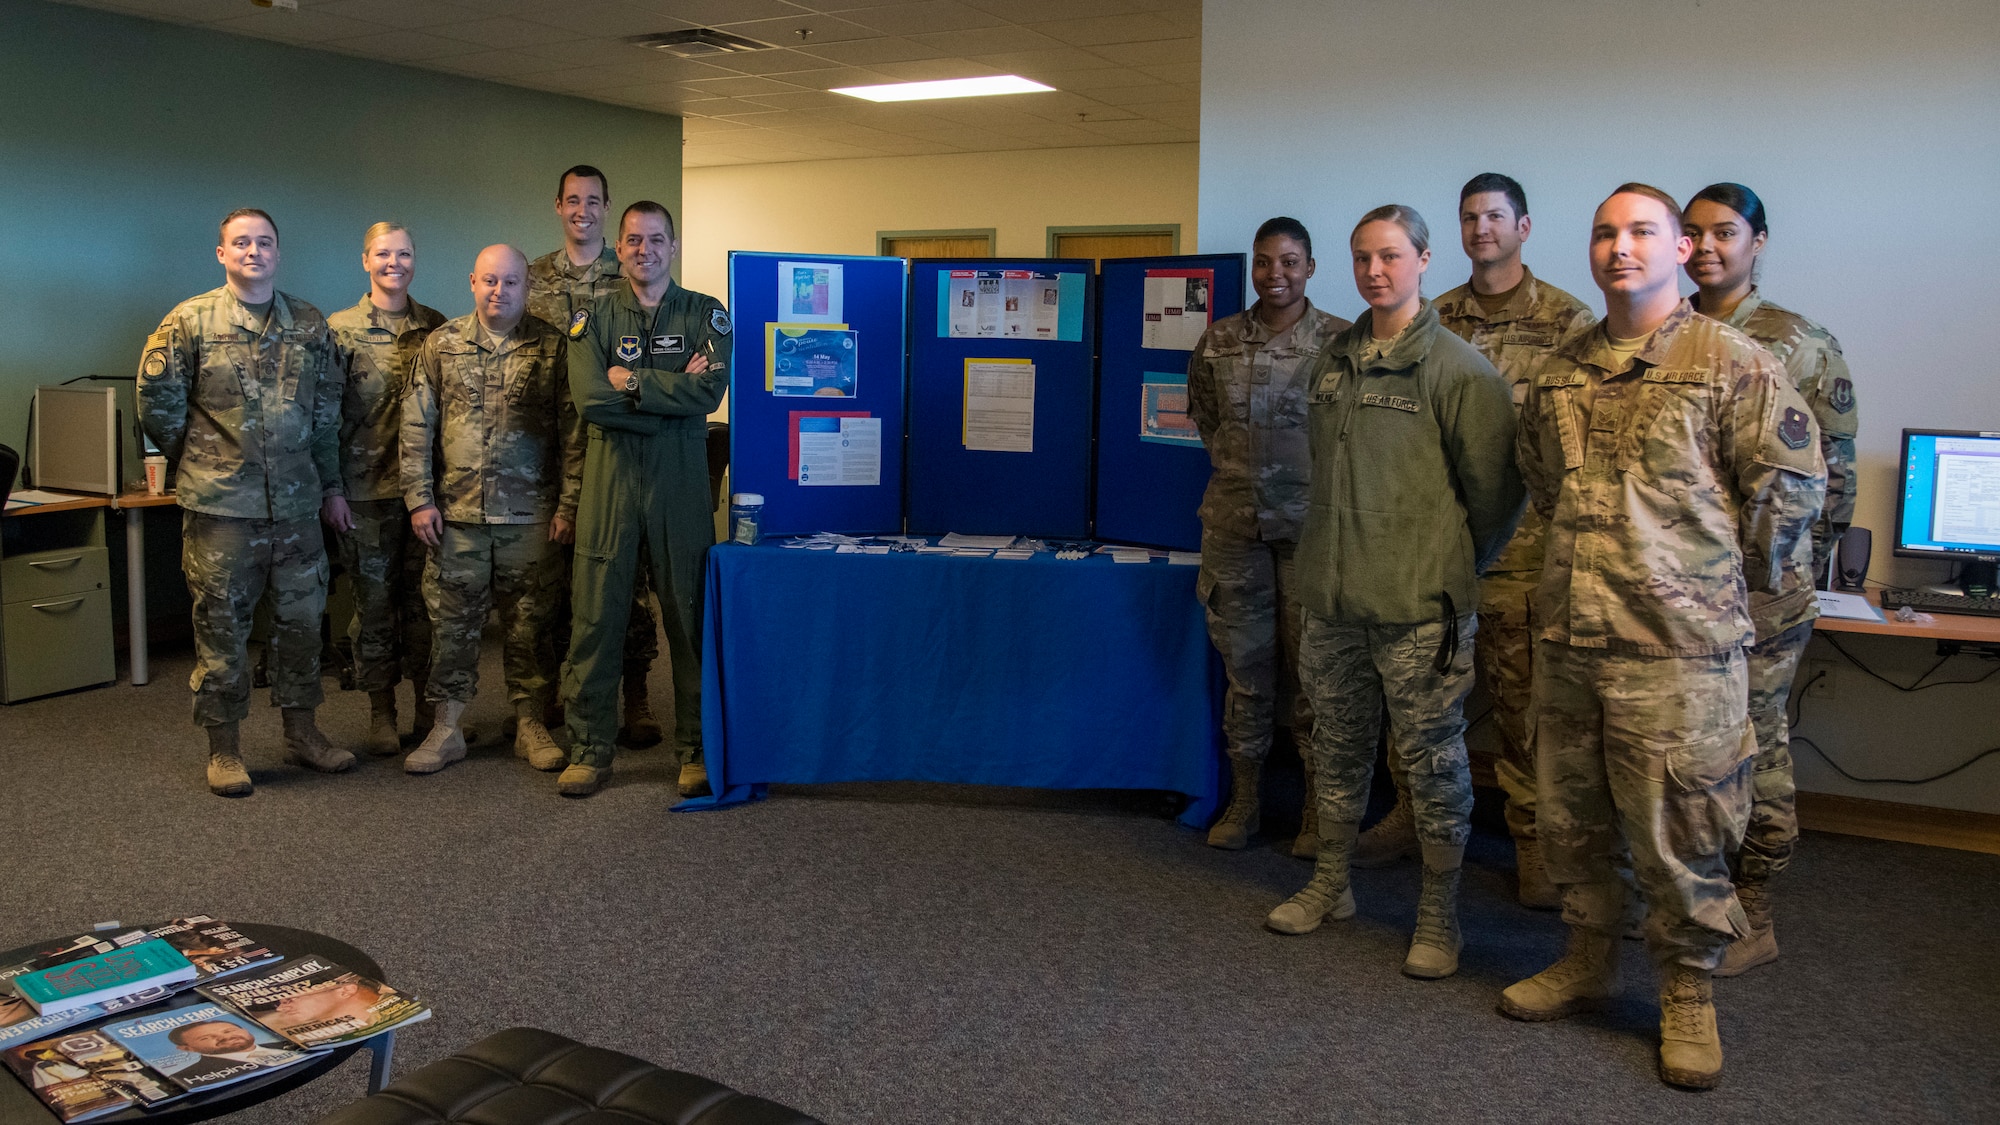 Air Force Assistance Fund volunteers and base leadership pause for a photo at the AFAF kick-off event at the Holloman Airman and Family and Readiness Center Mar. 2, 2020. The AFAF is a charitable donation campaign comprised of four charities that provide funds to active-duty service members, retirees, reservists, guard, dependents and surviving spouses in need. (U.S. Air Force photo by Senior Airman Collette Brooks)